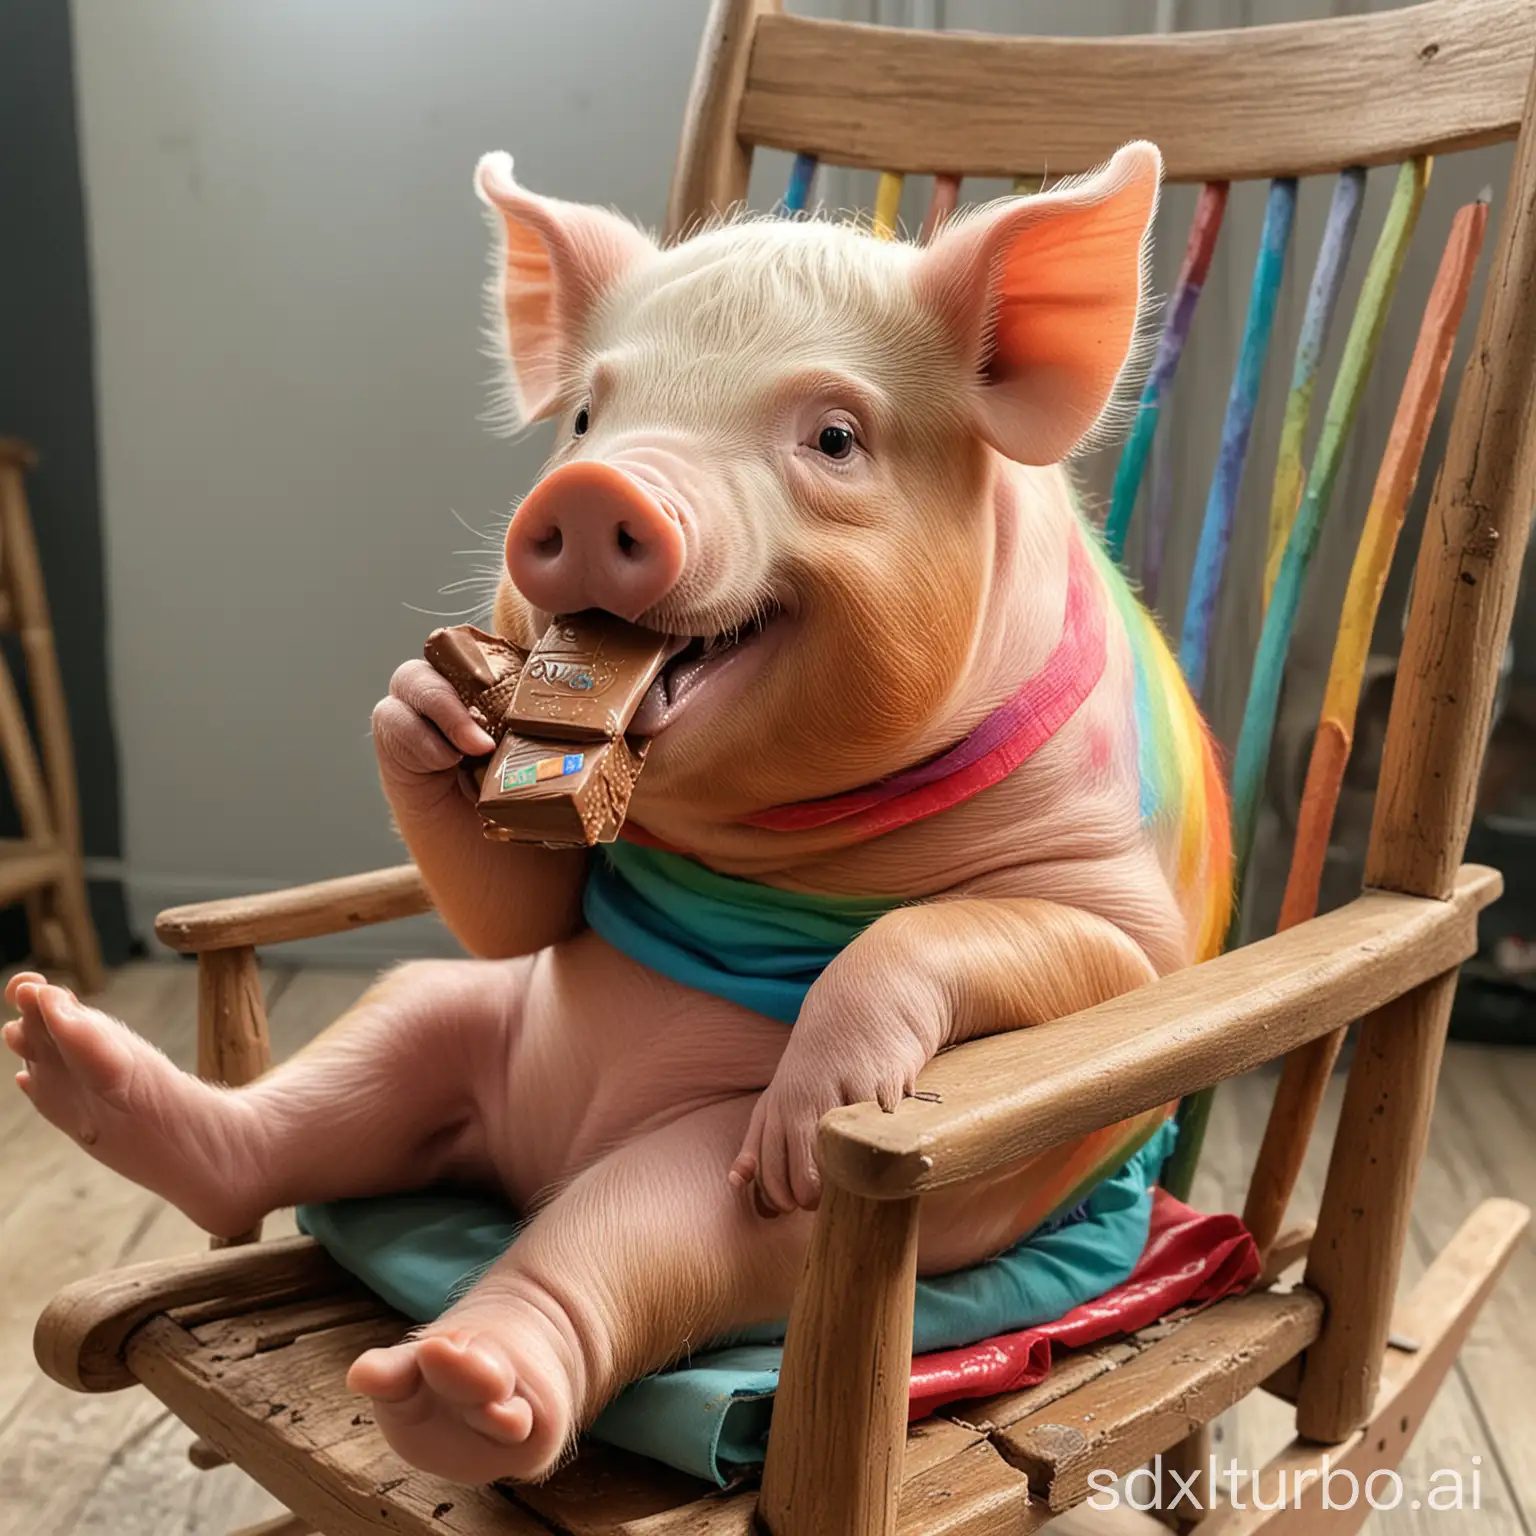 A rainbow-colored pig lying on a rocking chair, eating chocolate from its mouth and holding it with its hand.